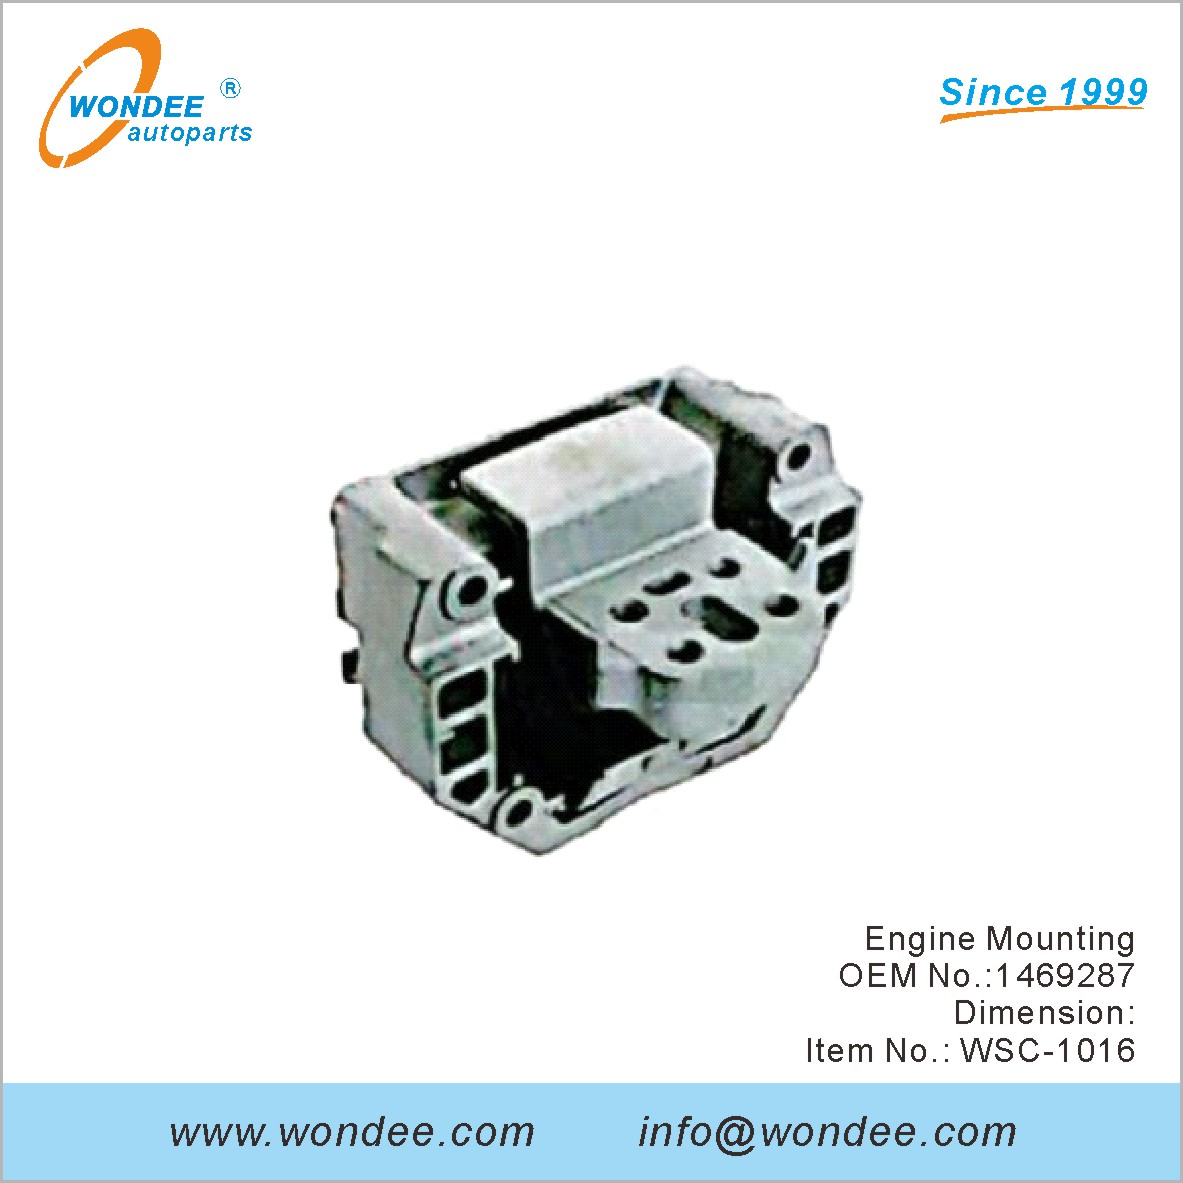 Engine Mounting OEM 1469287 from WONDEE